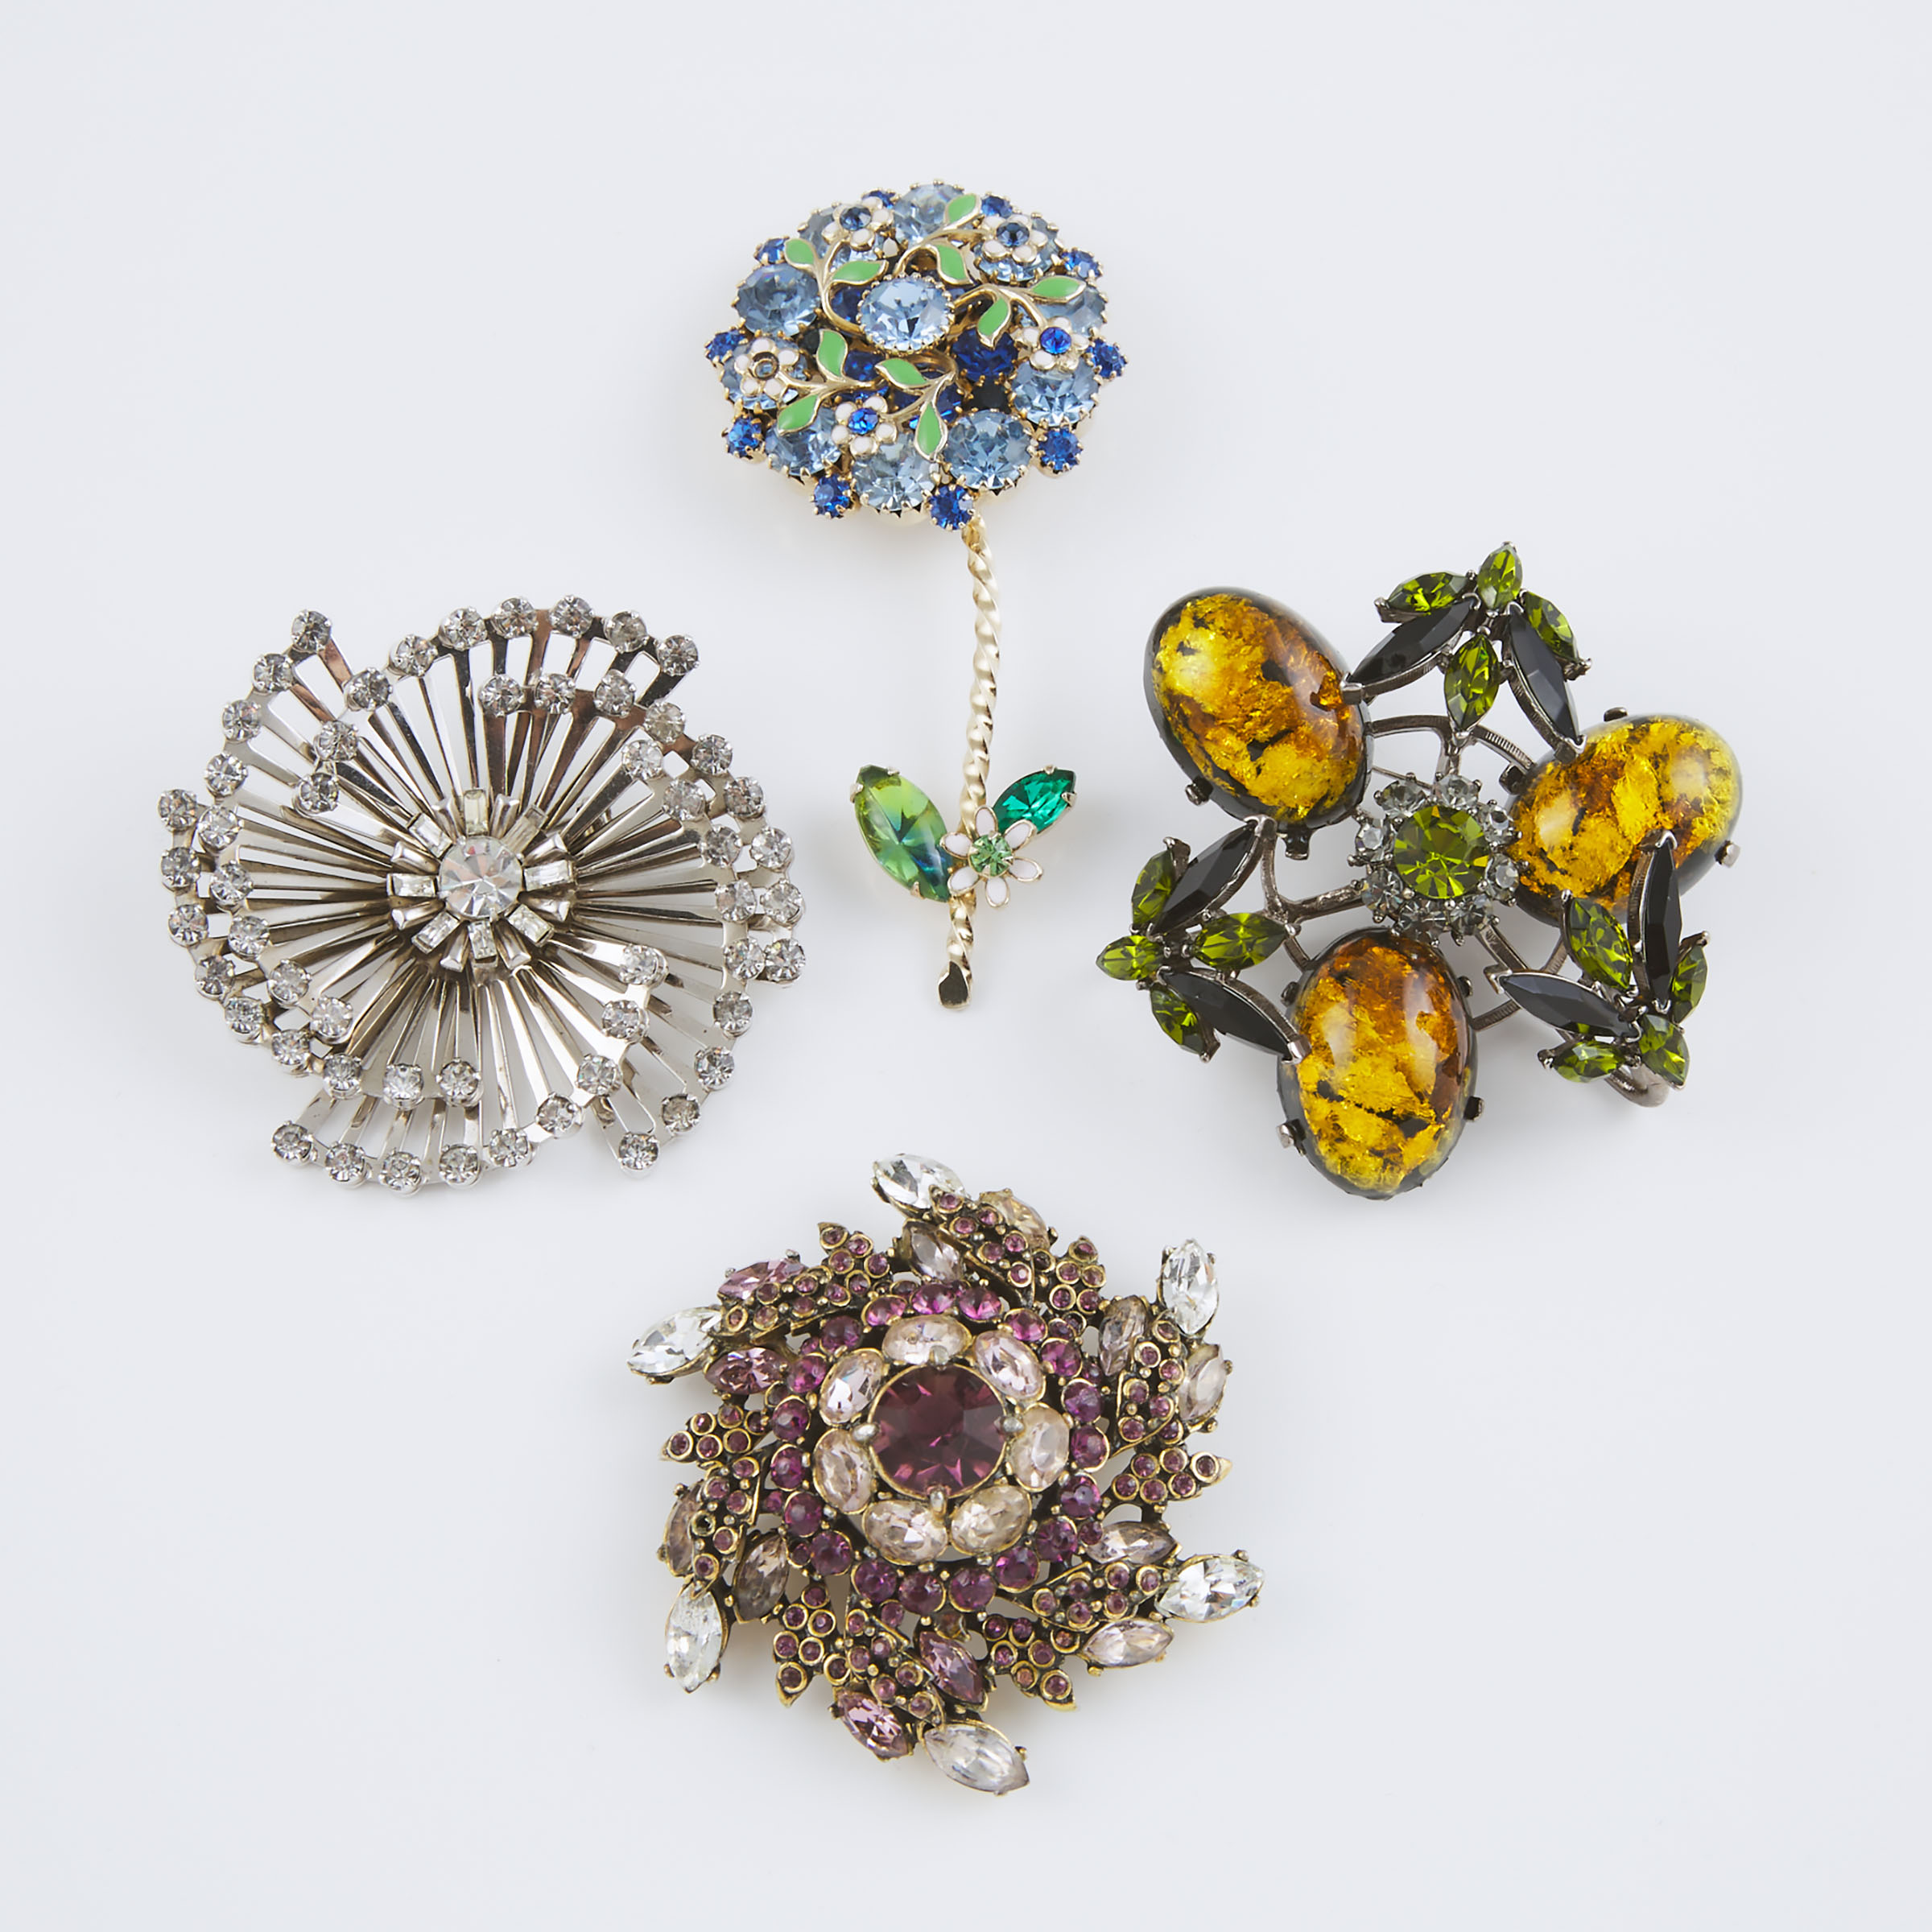 4 Various Gold And Silver-Tone Metal Brooches